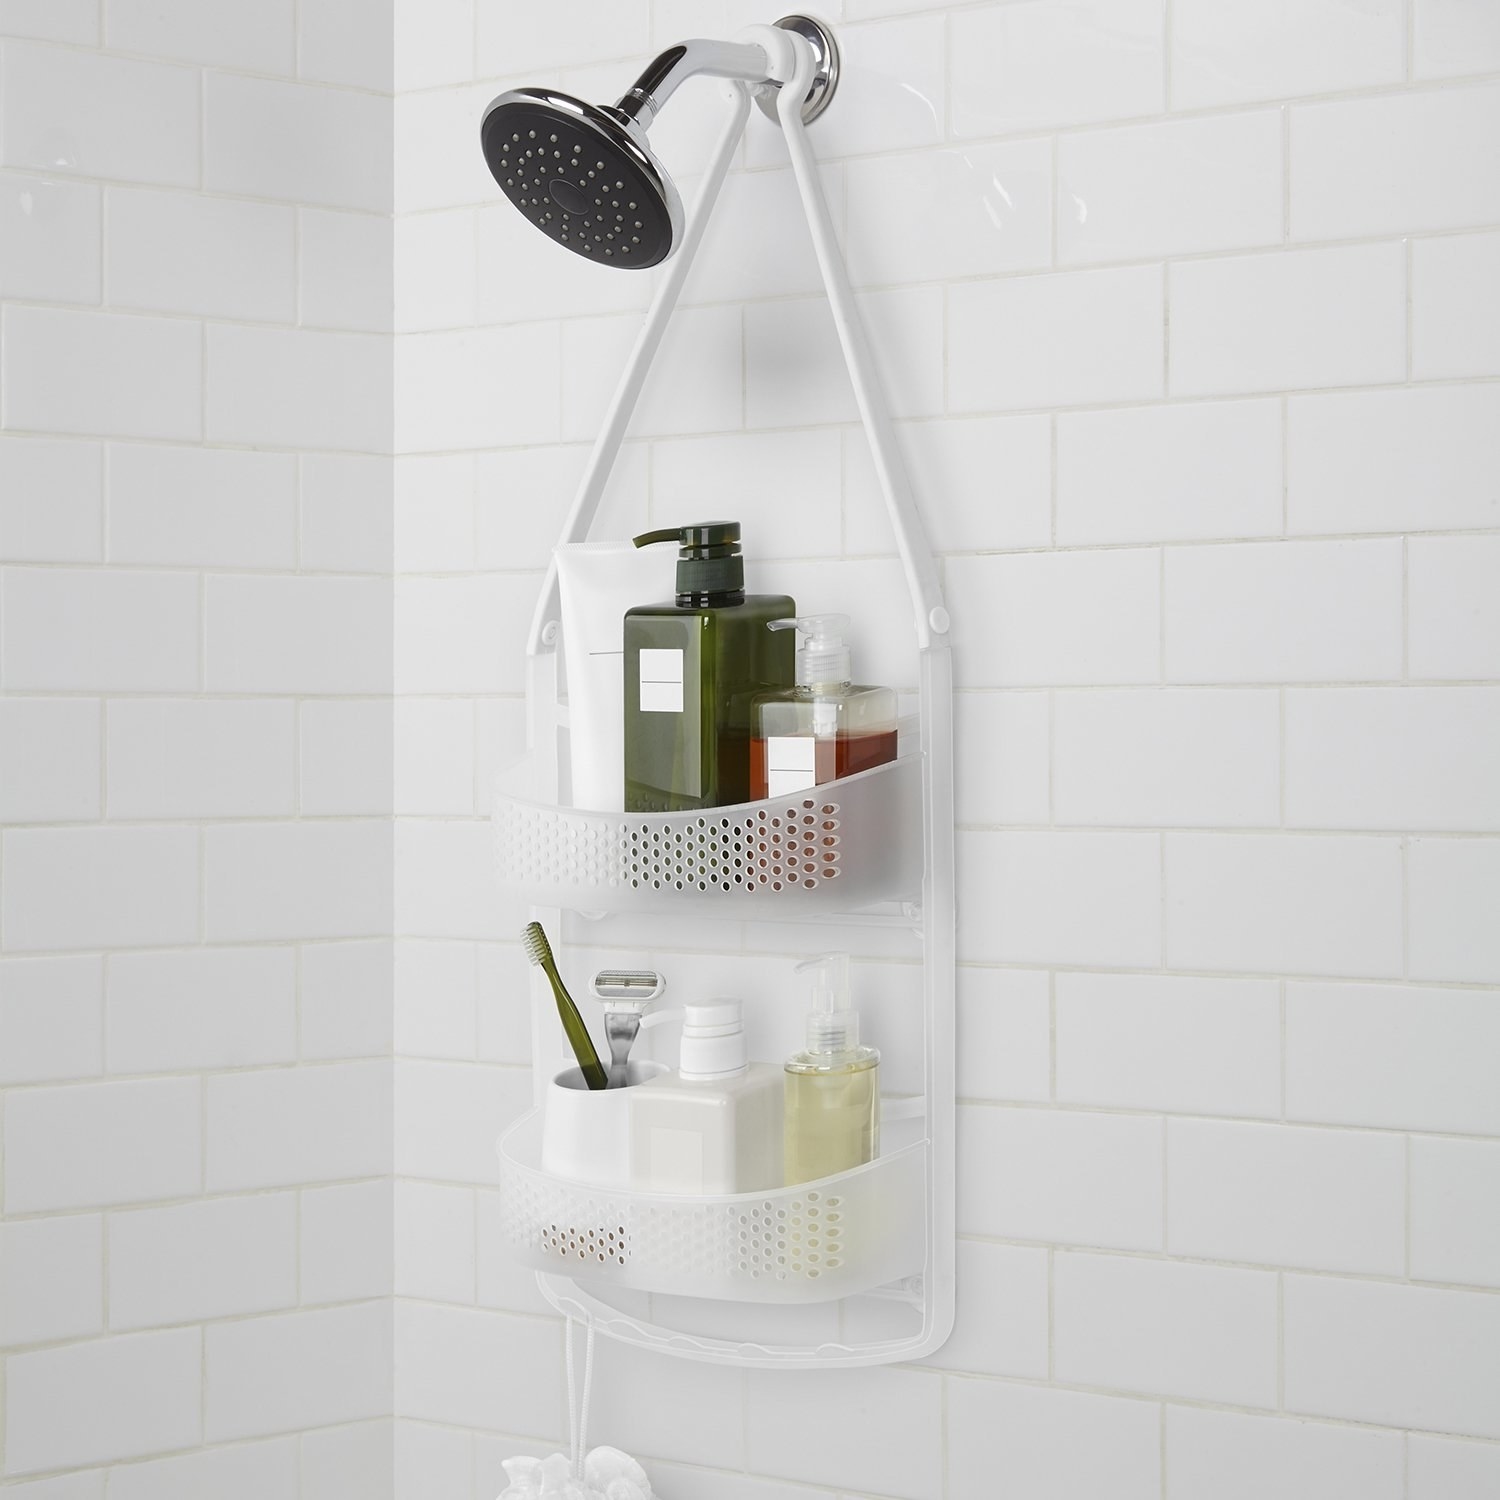 A shower caddy with shampoo, shower gel, a razor and miscellaneous bath essentials hung over a shower head on a white tiled bathroom wall